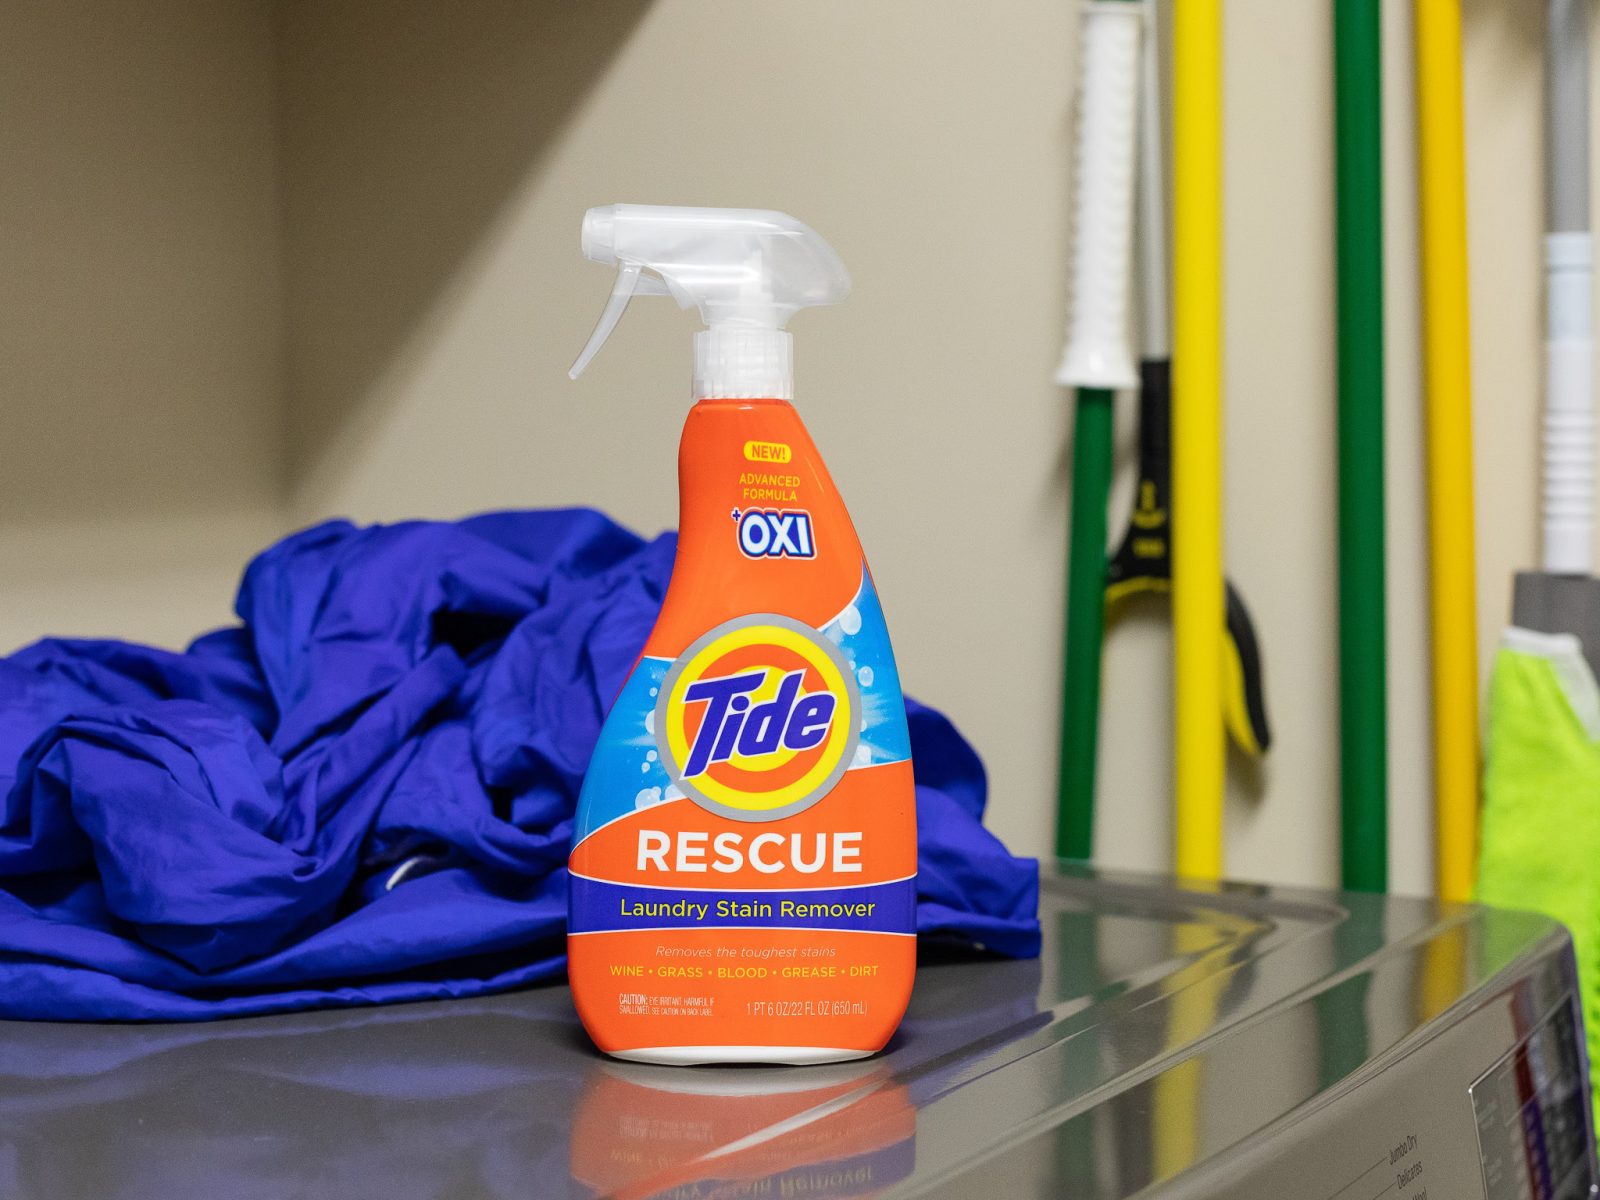 Tide Rescue Laundry Stain Remover Spray As Low As $2.49 At Publix – Half Price